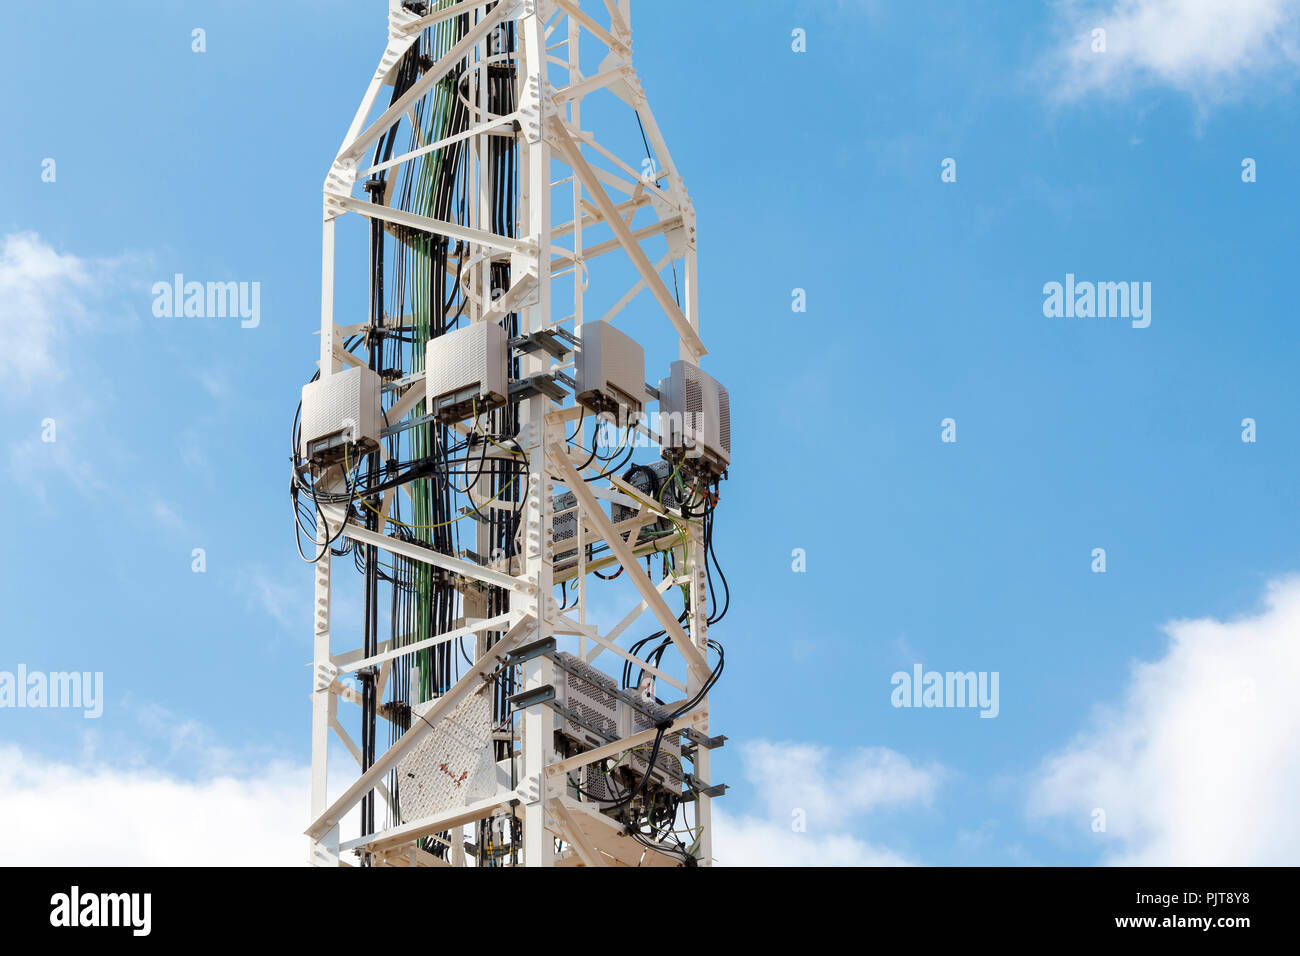 Telecommunications tower against blue sky. Stock Photo